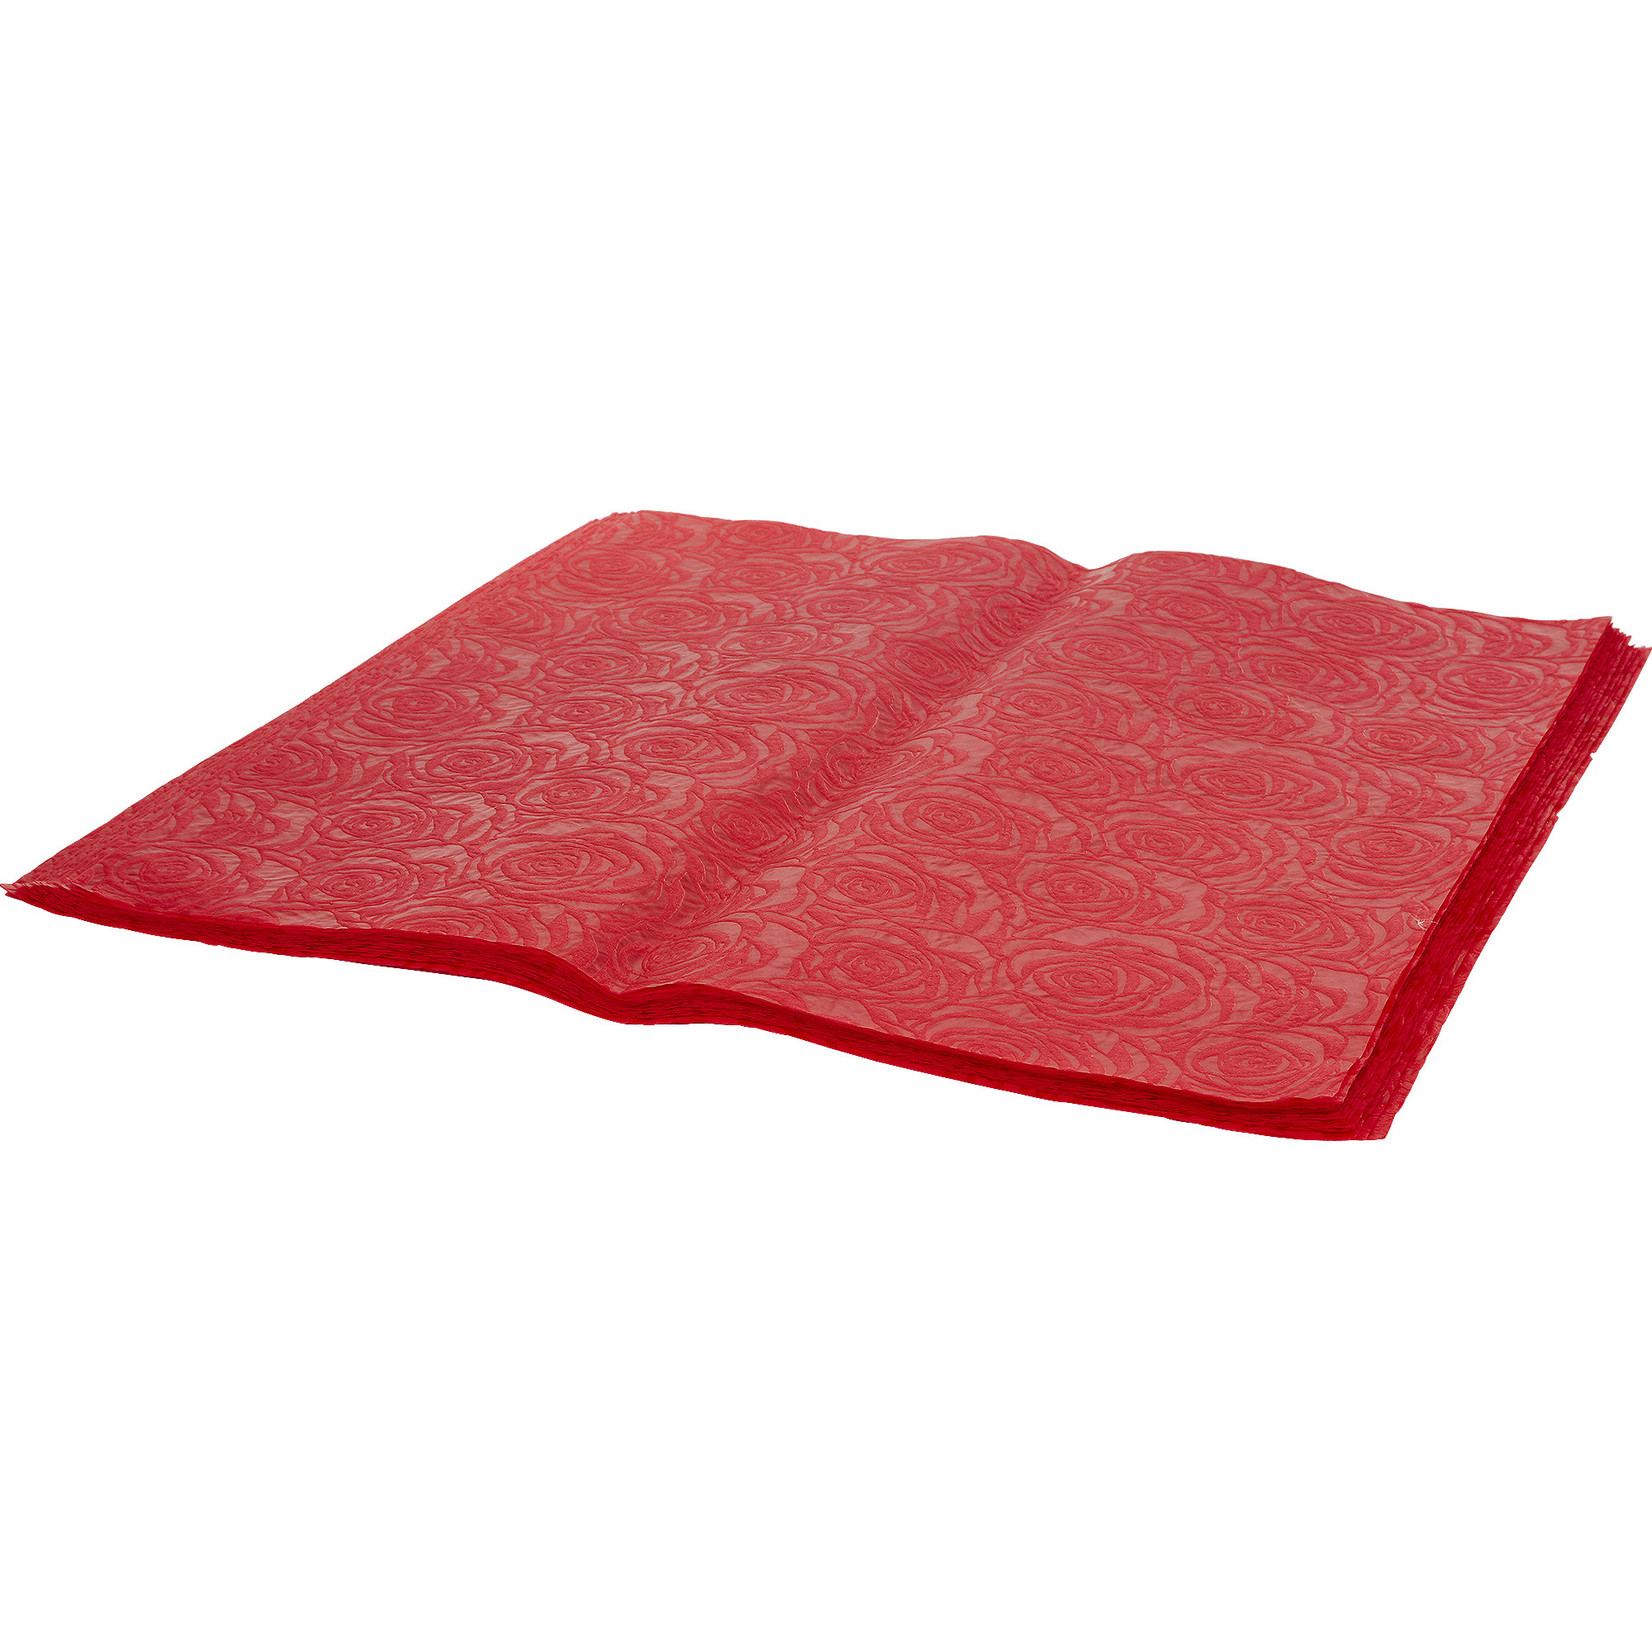 RED EMBOSSED NONWOVEN FLORAL WRAPPING PAPER 20 PCS, 21X22''